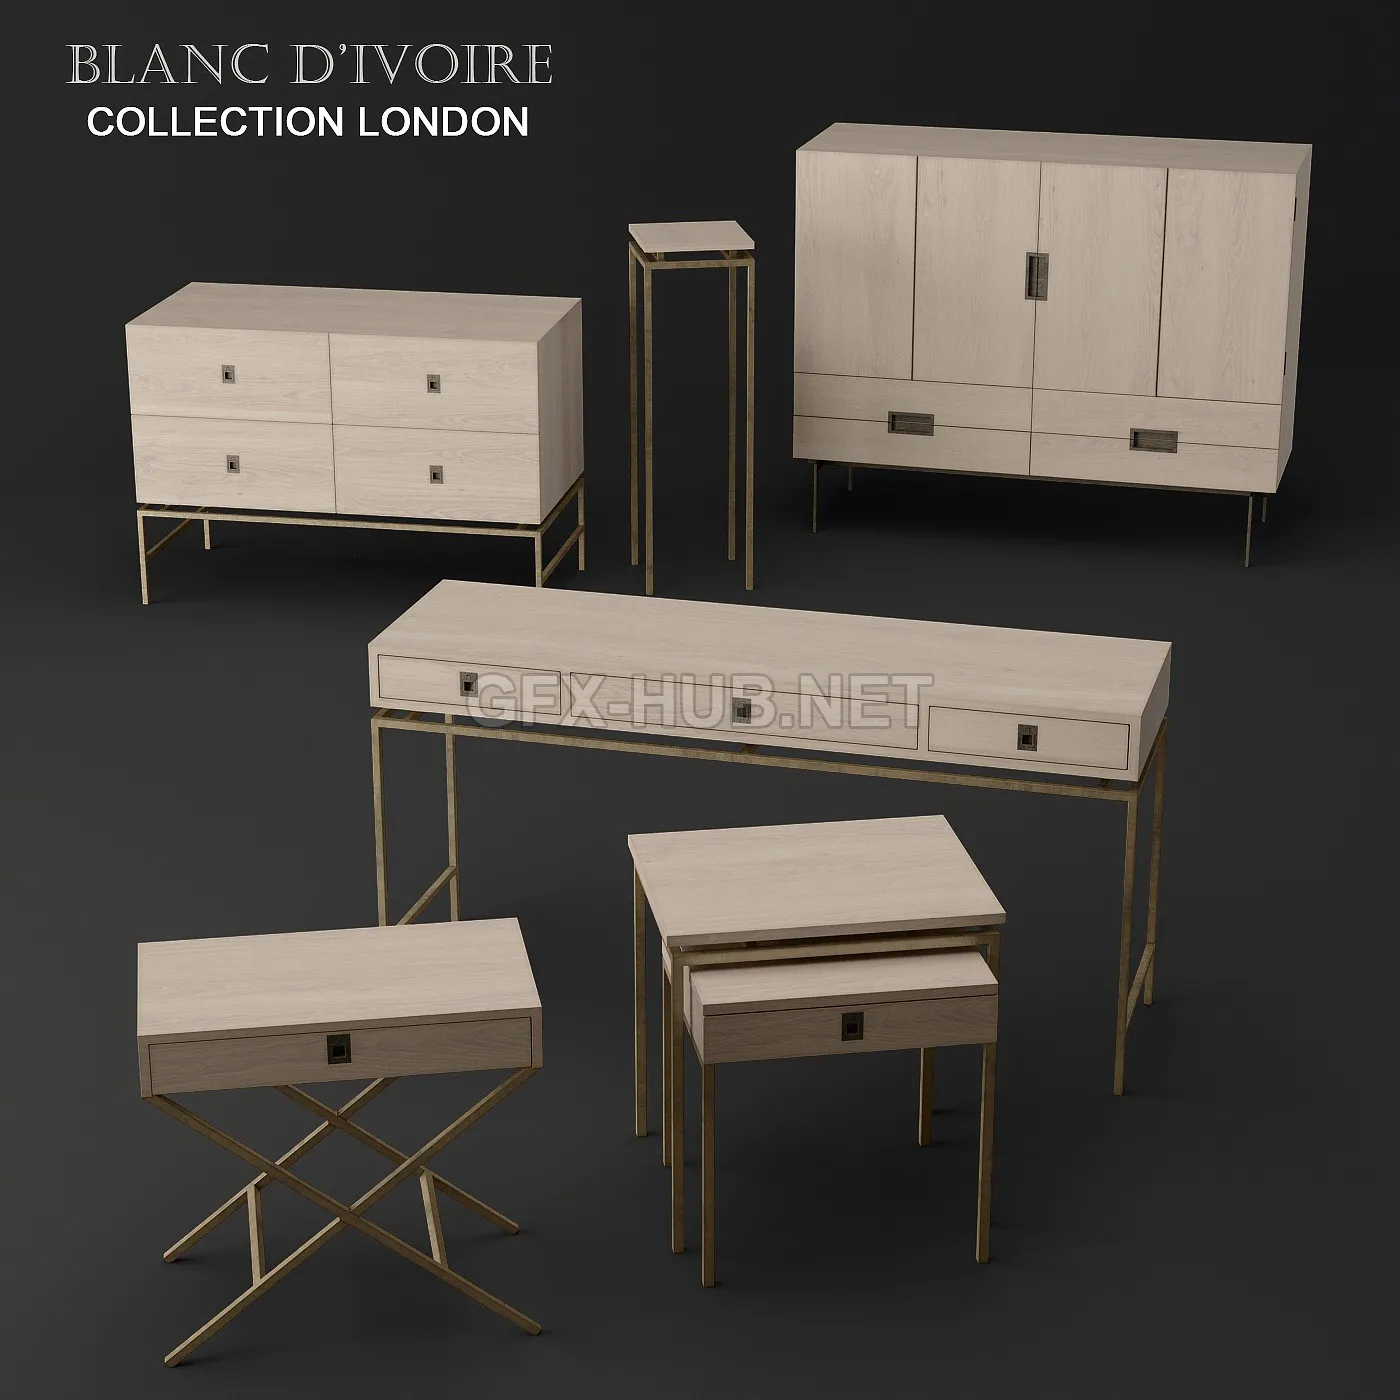 FURNITURE 3D MODELS – blancdivoire – LONDON collection